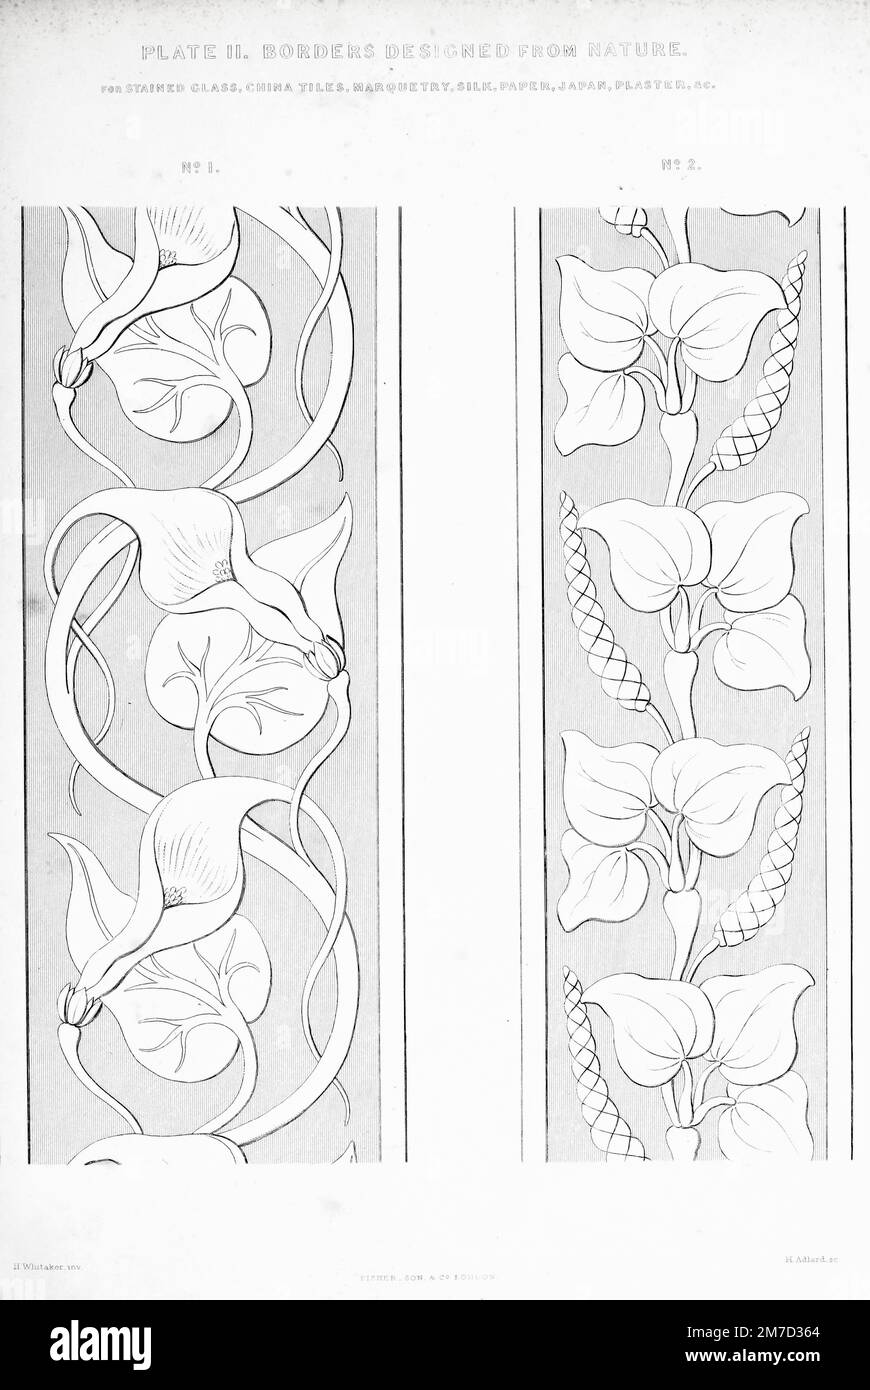 Two Borders designed from nature : No. 1, a species of birthwort, curious for the long tail with which the petal of the corolla terminates; No. 2, a species of pepper, very curious for the knotty joints upon wdiich the branches and the leaves arise; it in fact grows exactly as drawn. Both the borders are calculated for stained-glass painting, china tiles, marquetry, silk, paper, japanning, plaster, and other objects from The practical cabinet maker & upholsterer's treasury of designs : house-furnishing & decorating assistant : in the Grecian, Italian, Renaissance, Louis-Quatorze, Gothic, Tudor Stock Photo